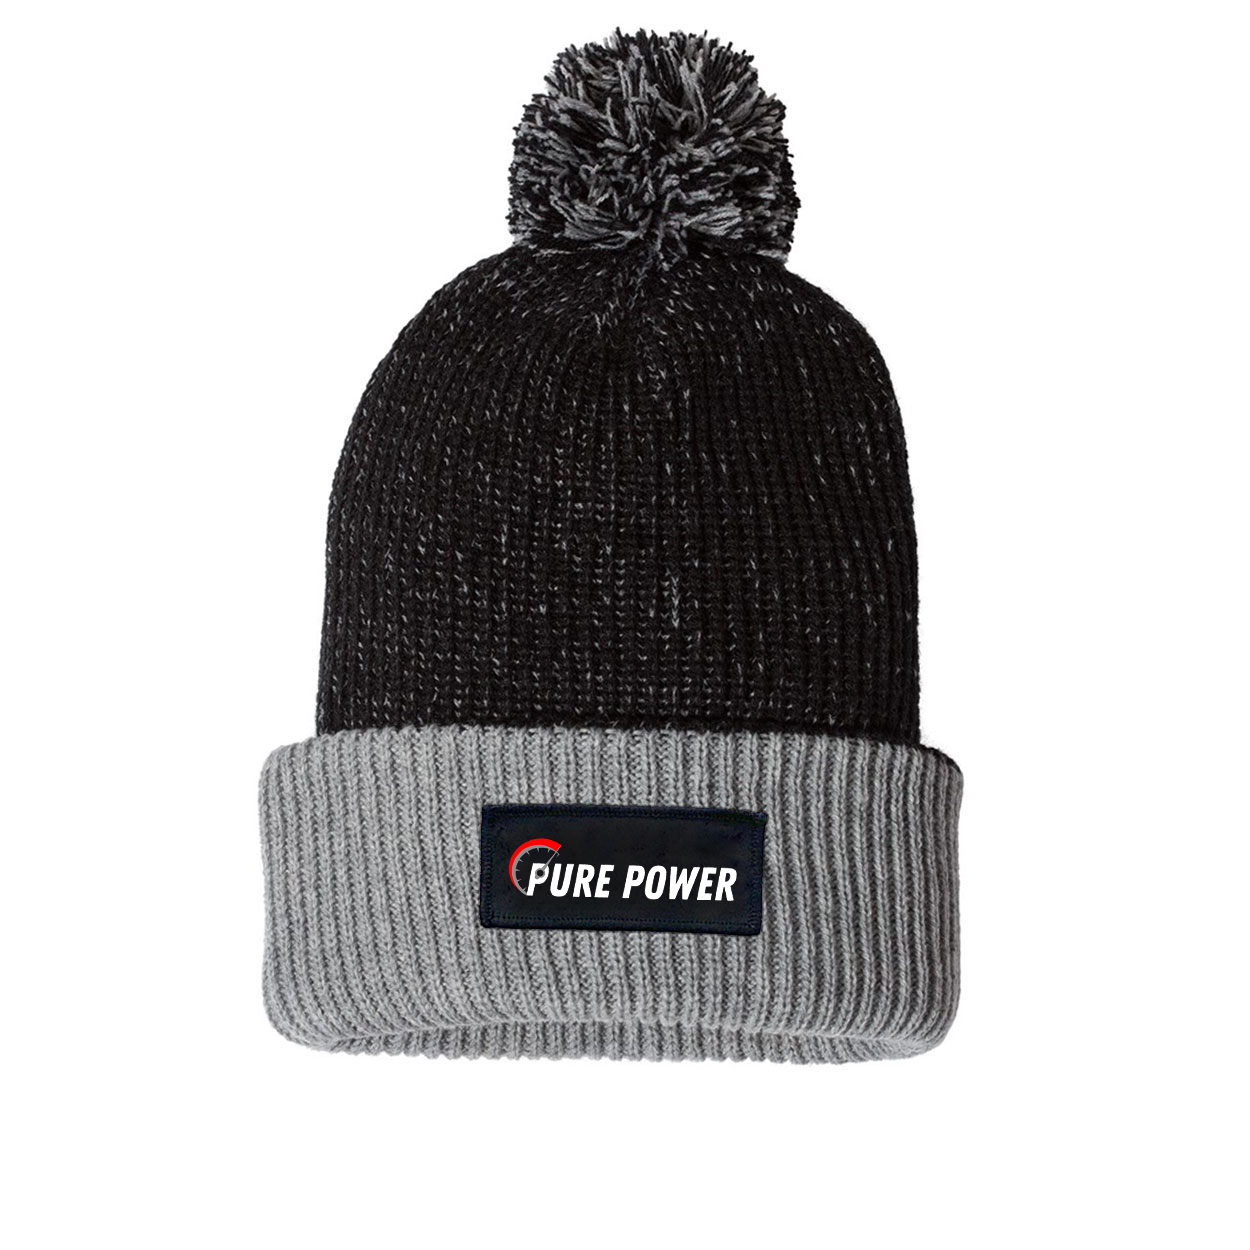 Ride Pure Power Logo Night Out Woven Patch Roll Up Pom Knit Beanie Black/Gray (White Logo)